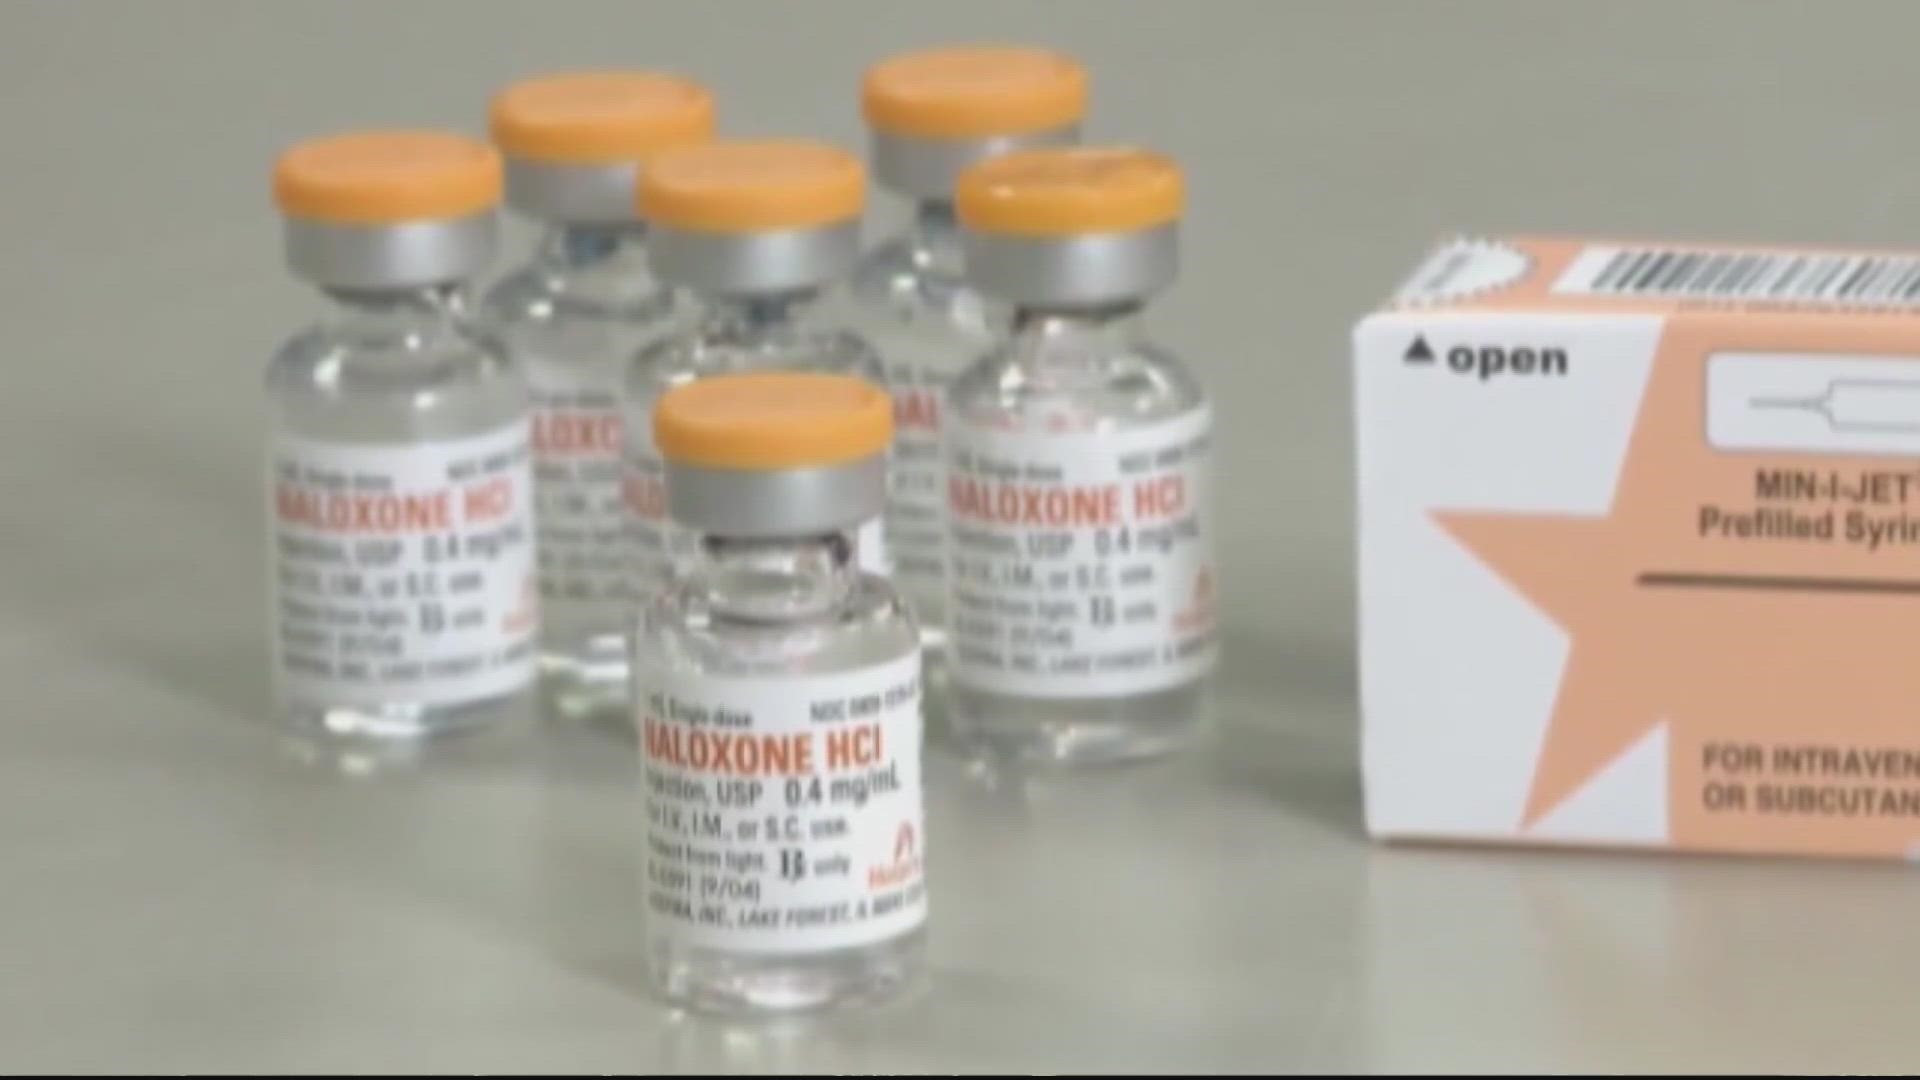 The Arlington Co. Dept. of Human Services fielded 700+ requests for Narcan and fentanyl strips last week following a student overdose death.